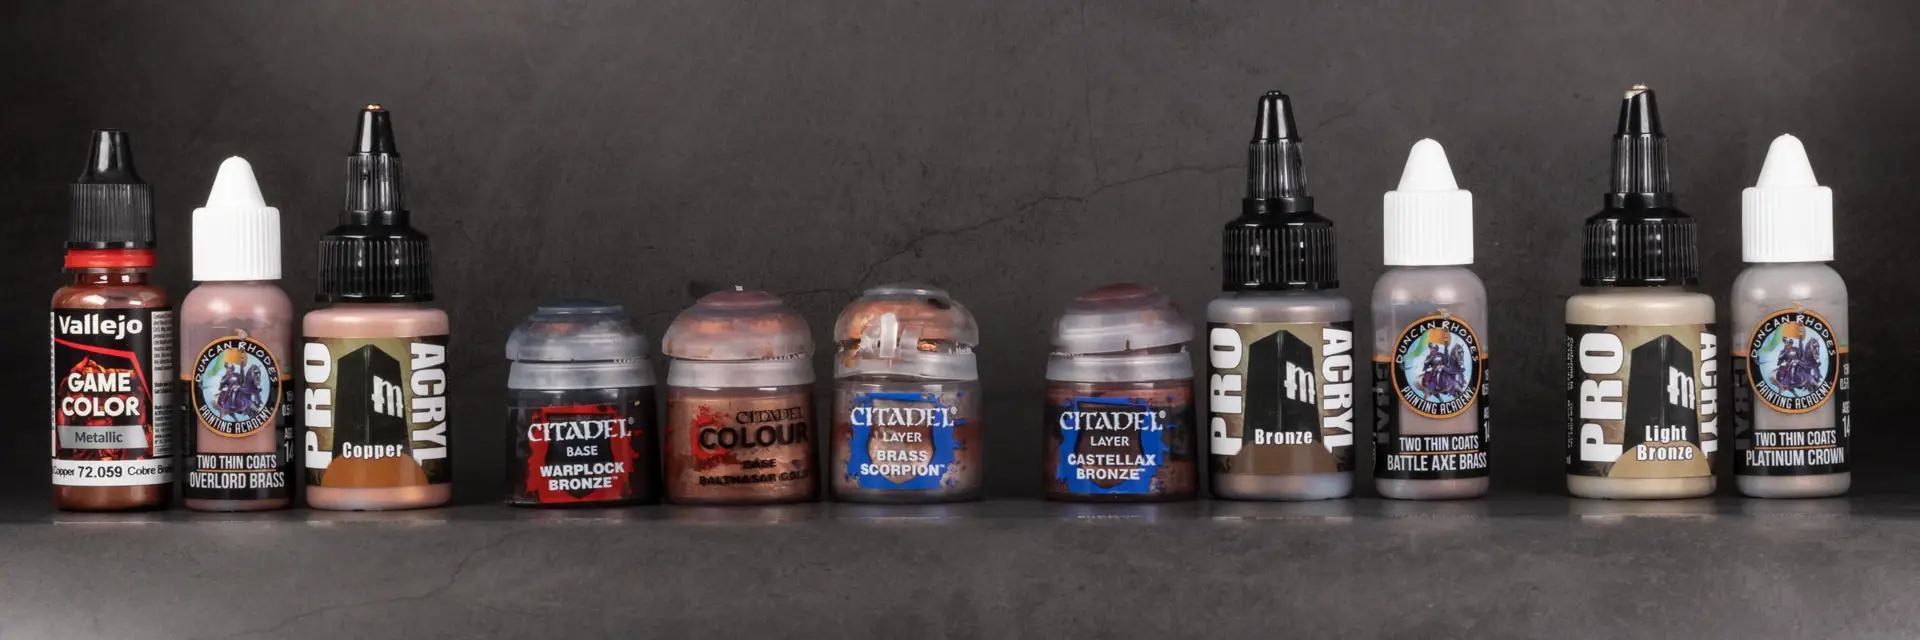 Stahly's best acrylic paints for painting Warhammer miniatures